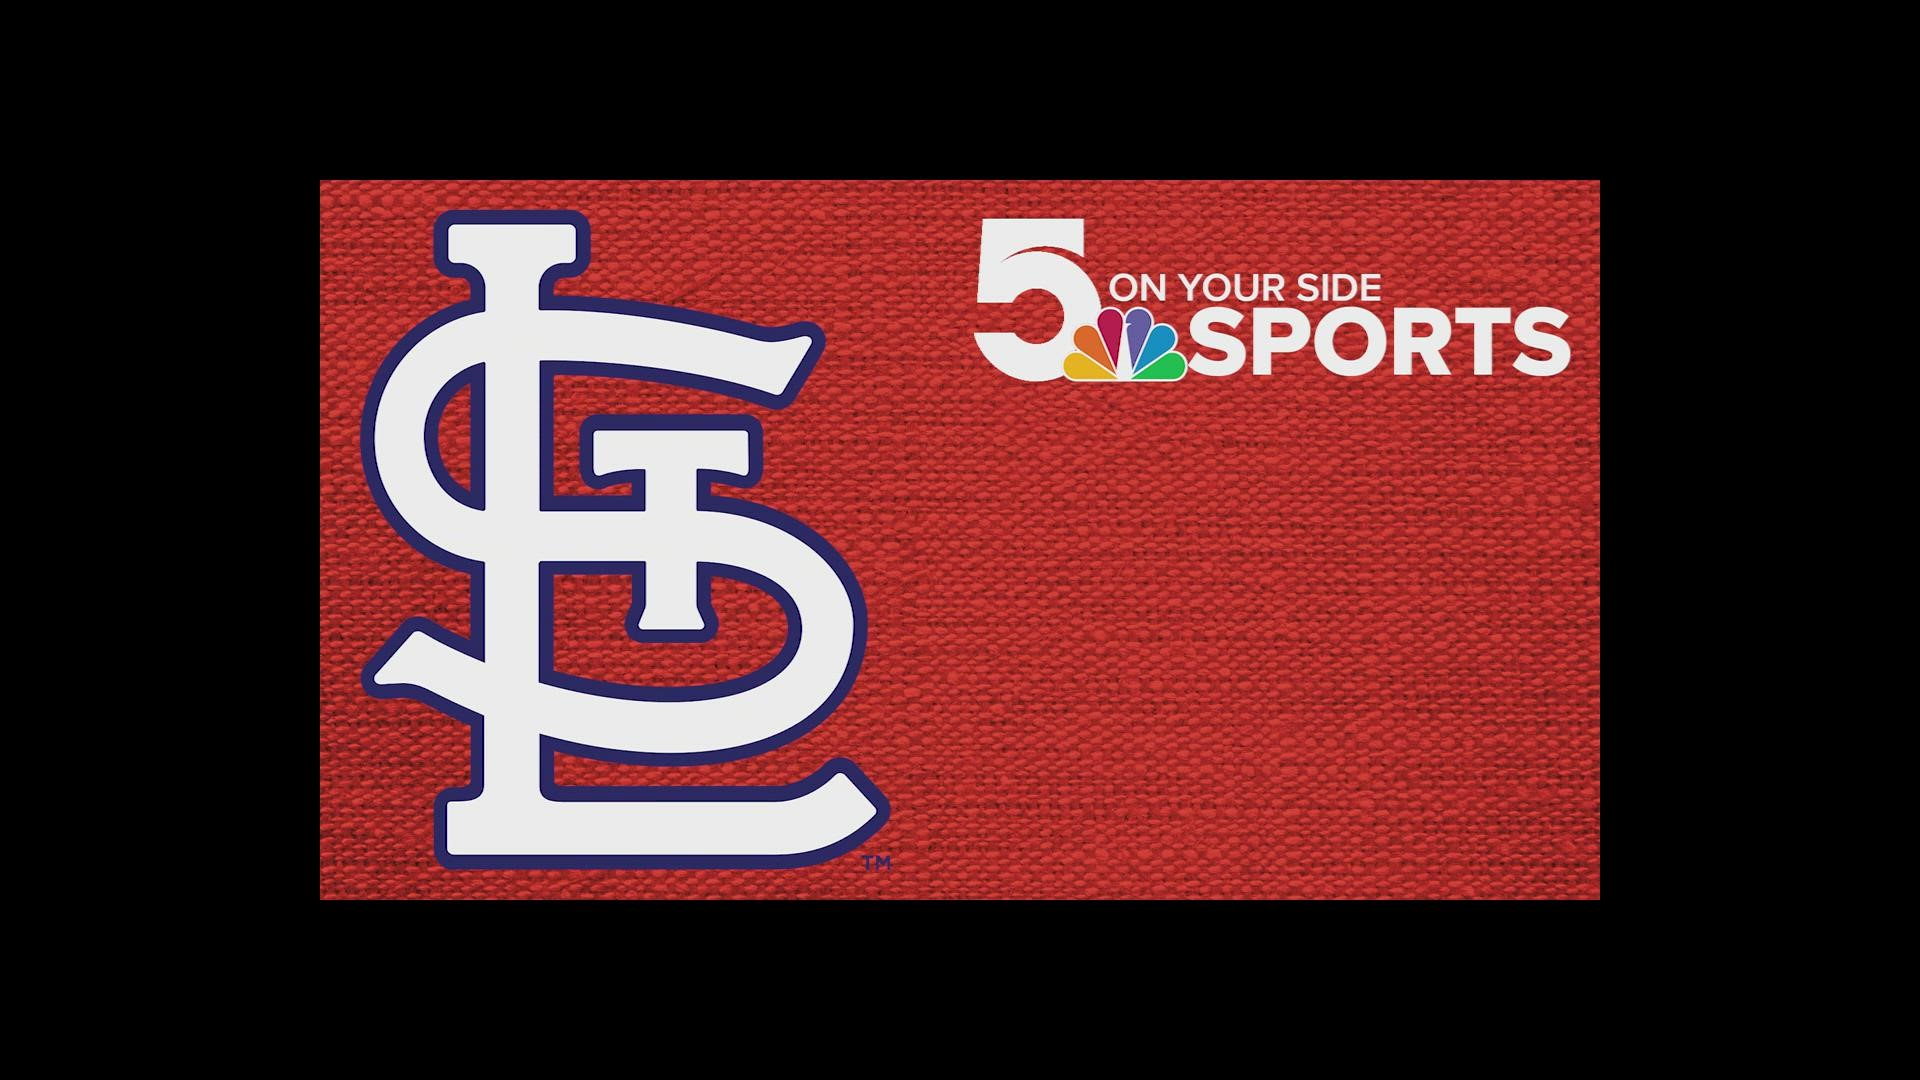 From 5 On Your Side Sports, introducing... Cardinals Plus. In-depth and interactive Cardinals coverage with 5 On Your Side's Corey Miller and Ahmad Hicks.